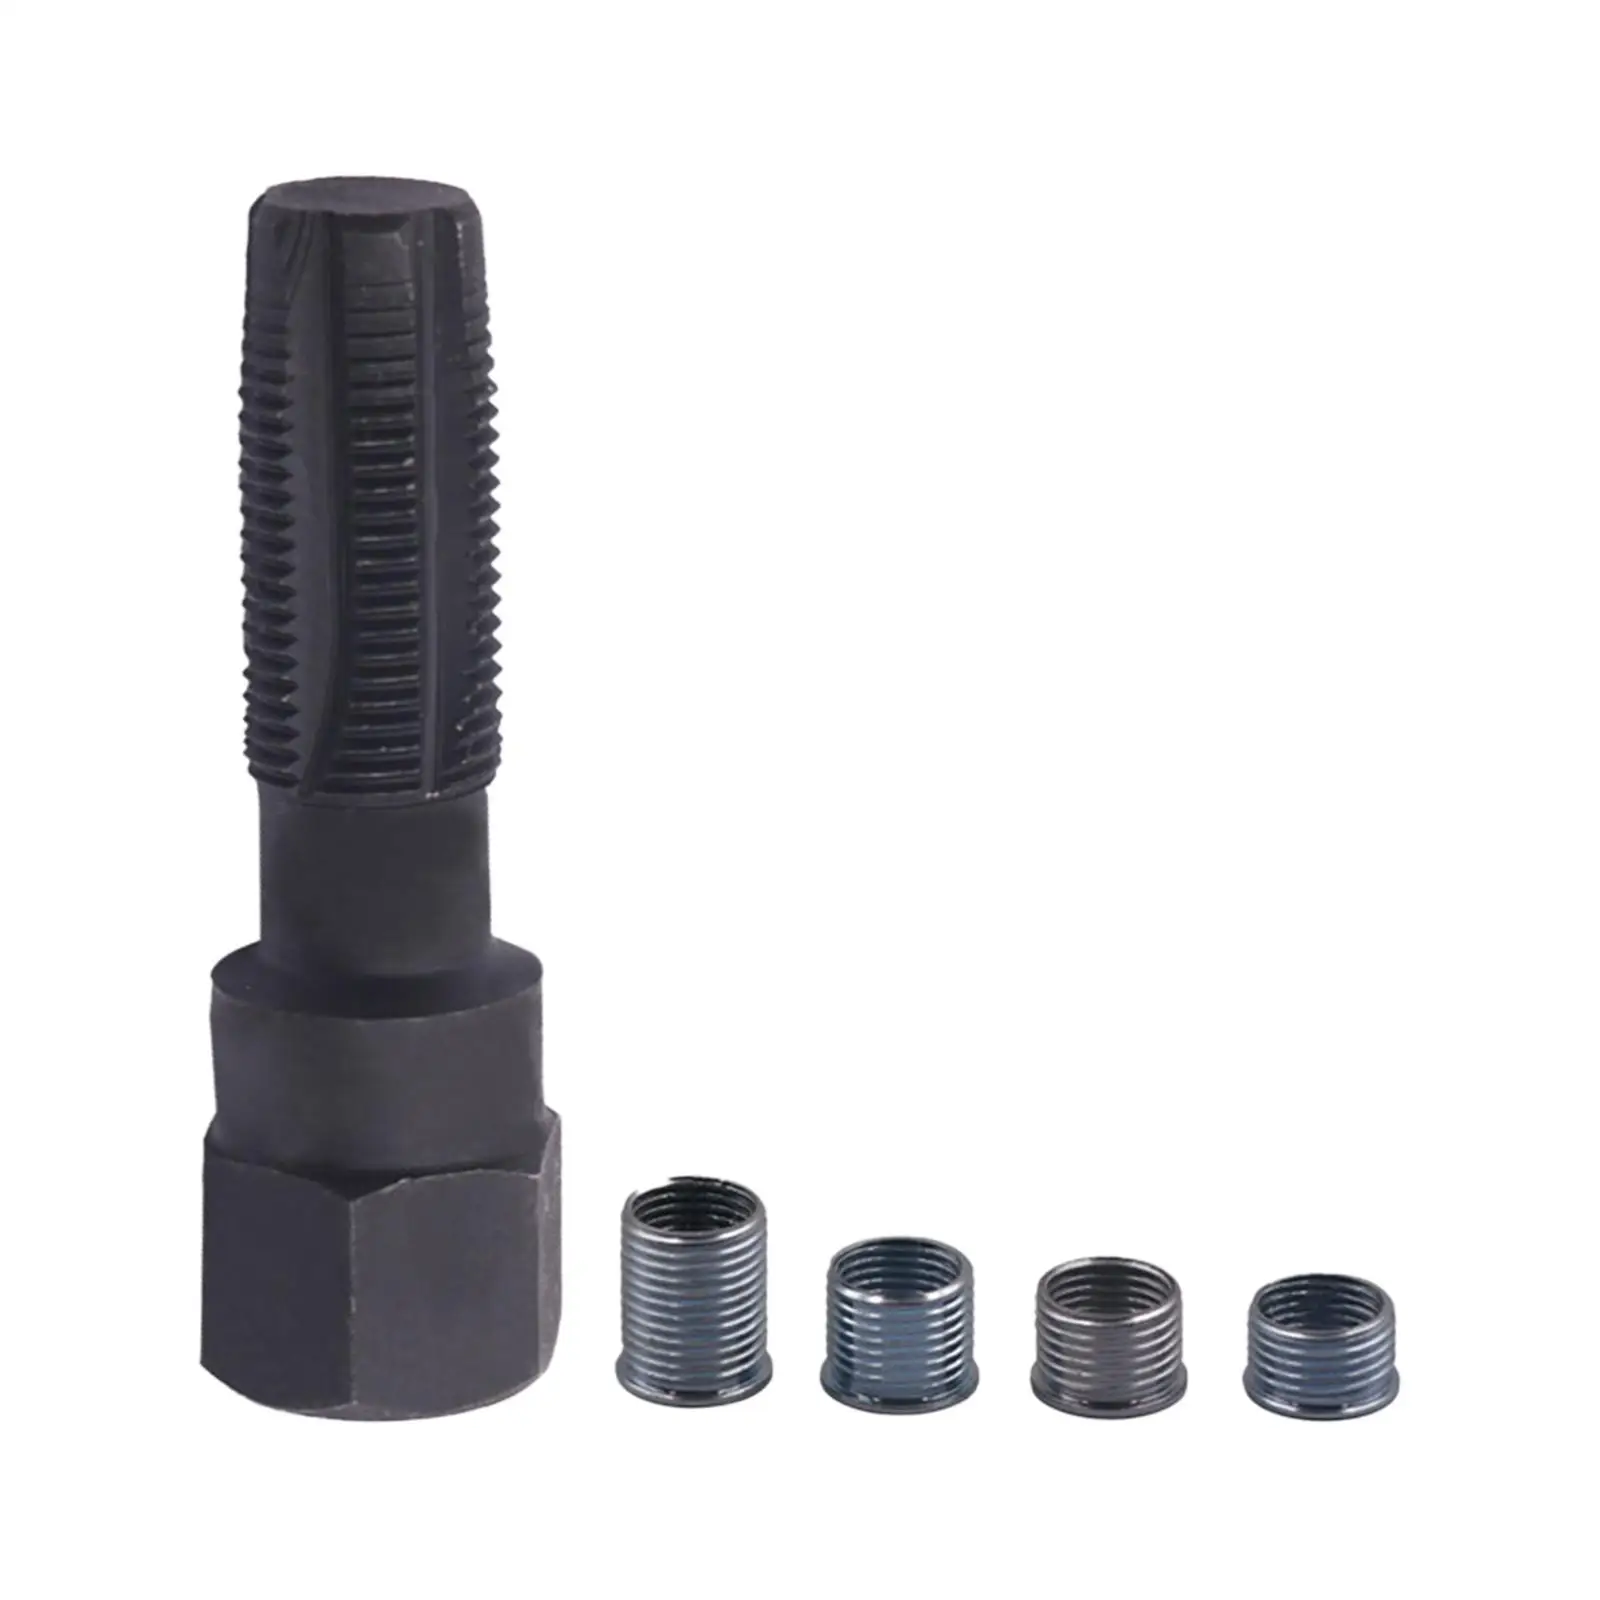 

14mm Spart Plug Thread Repair Kit Hardware for 14mm Sparking Plugs Repair Auto Accessories with Inserts Spark Plug Rethread Kit